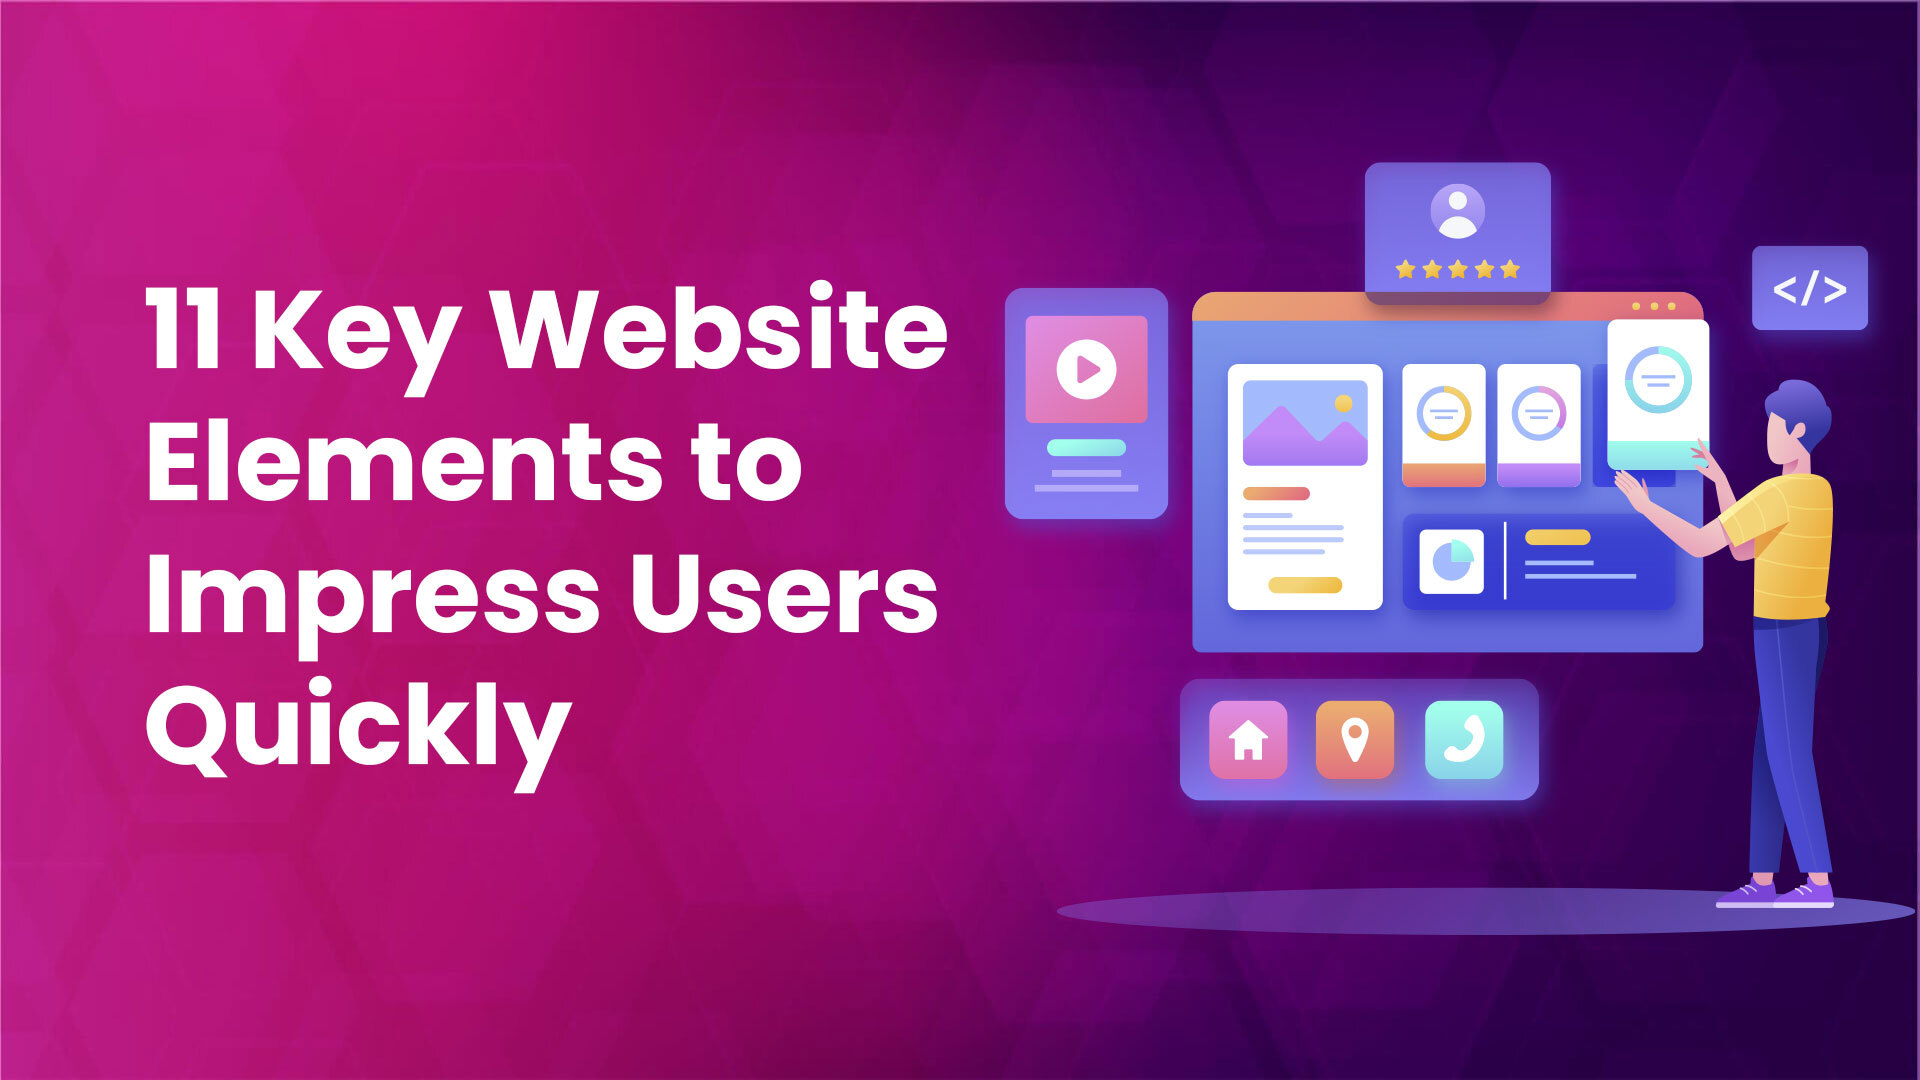 Website Elements to Impress Users